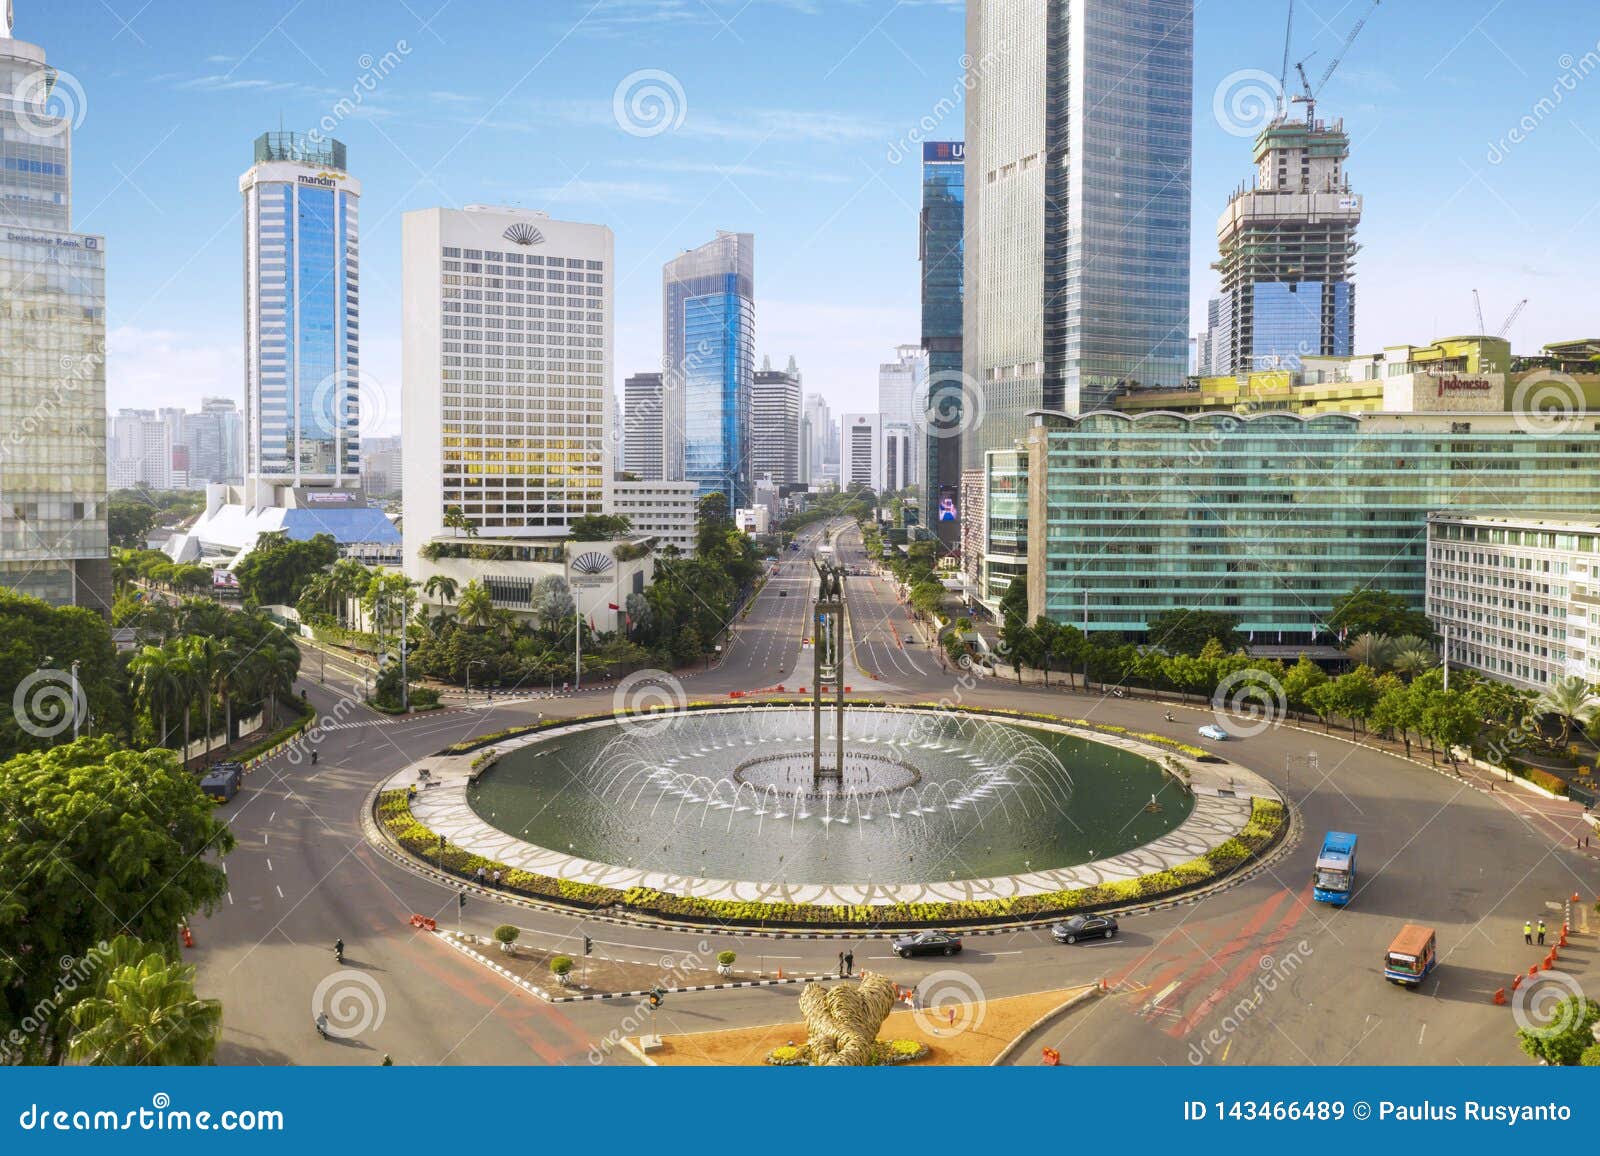 Selamat Datang Monument in Jakarta Downtown Editorial Stock Image